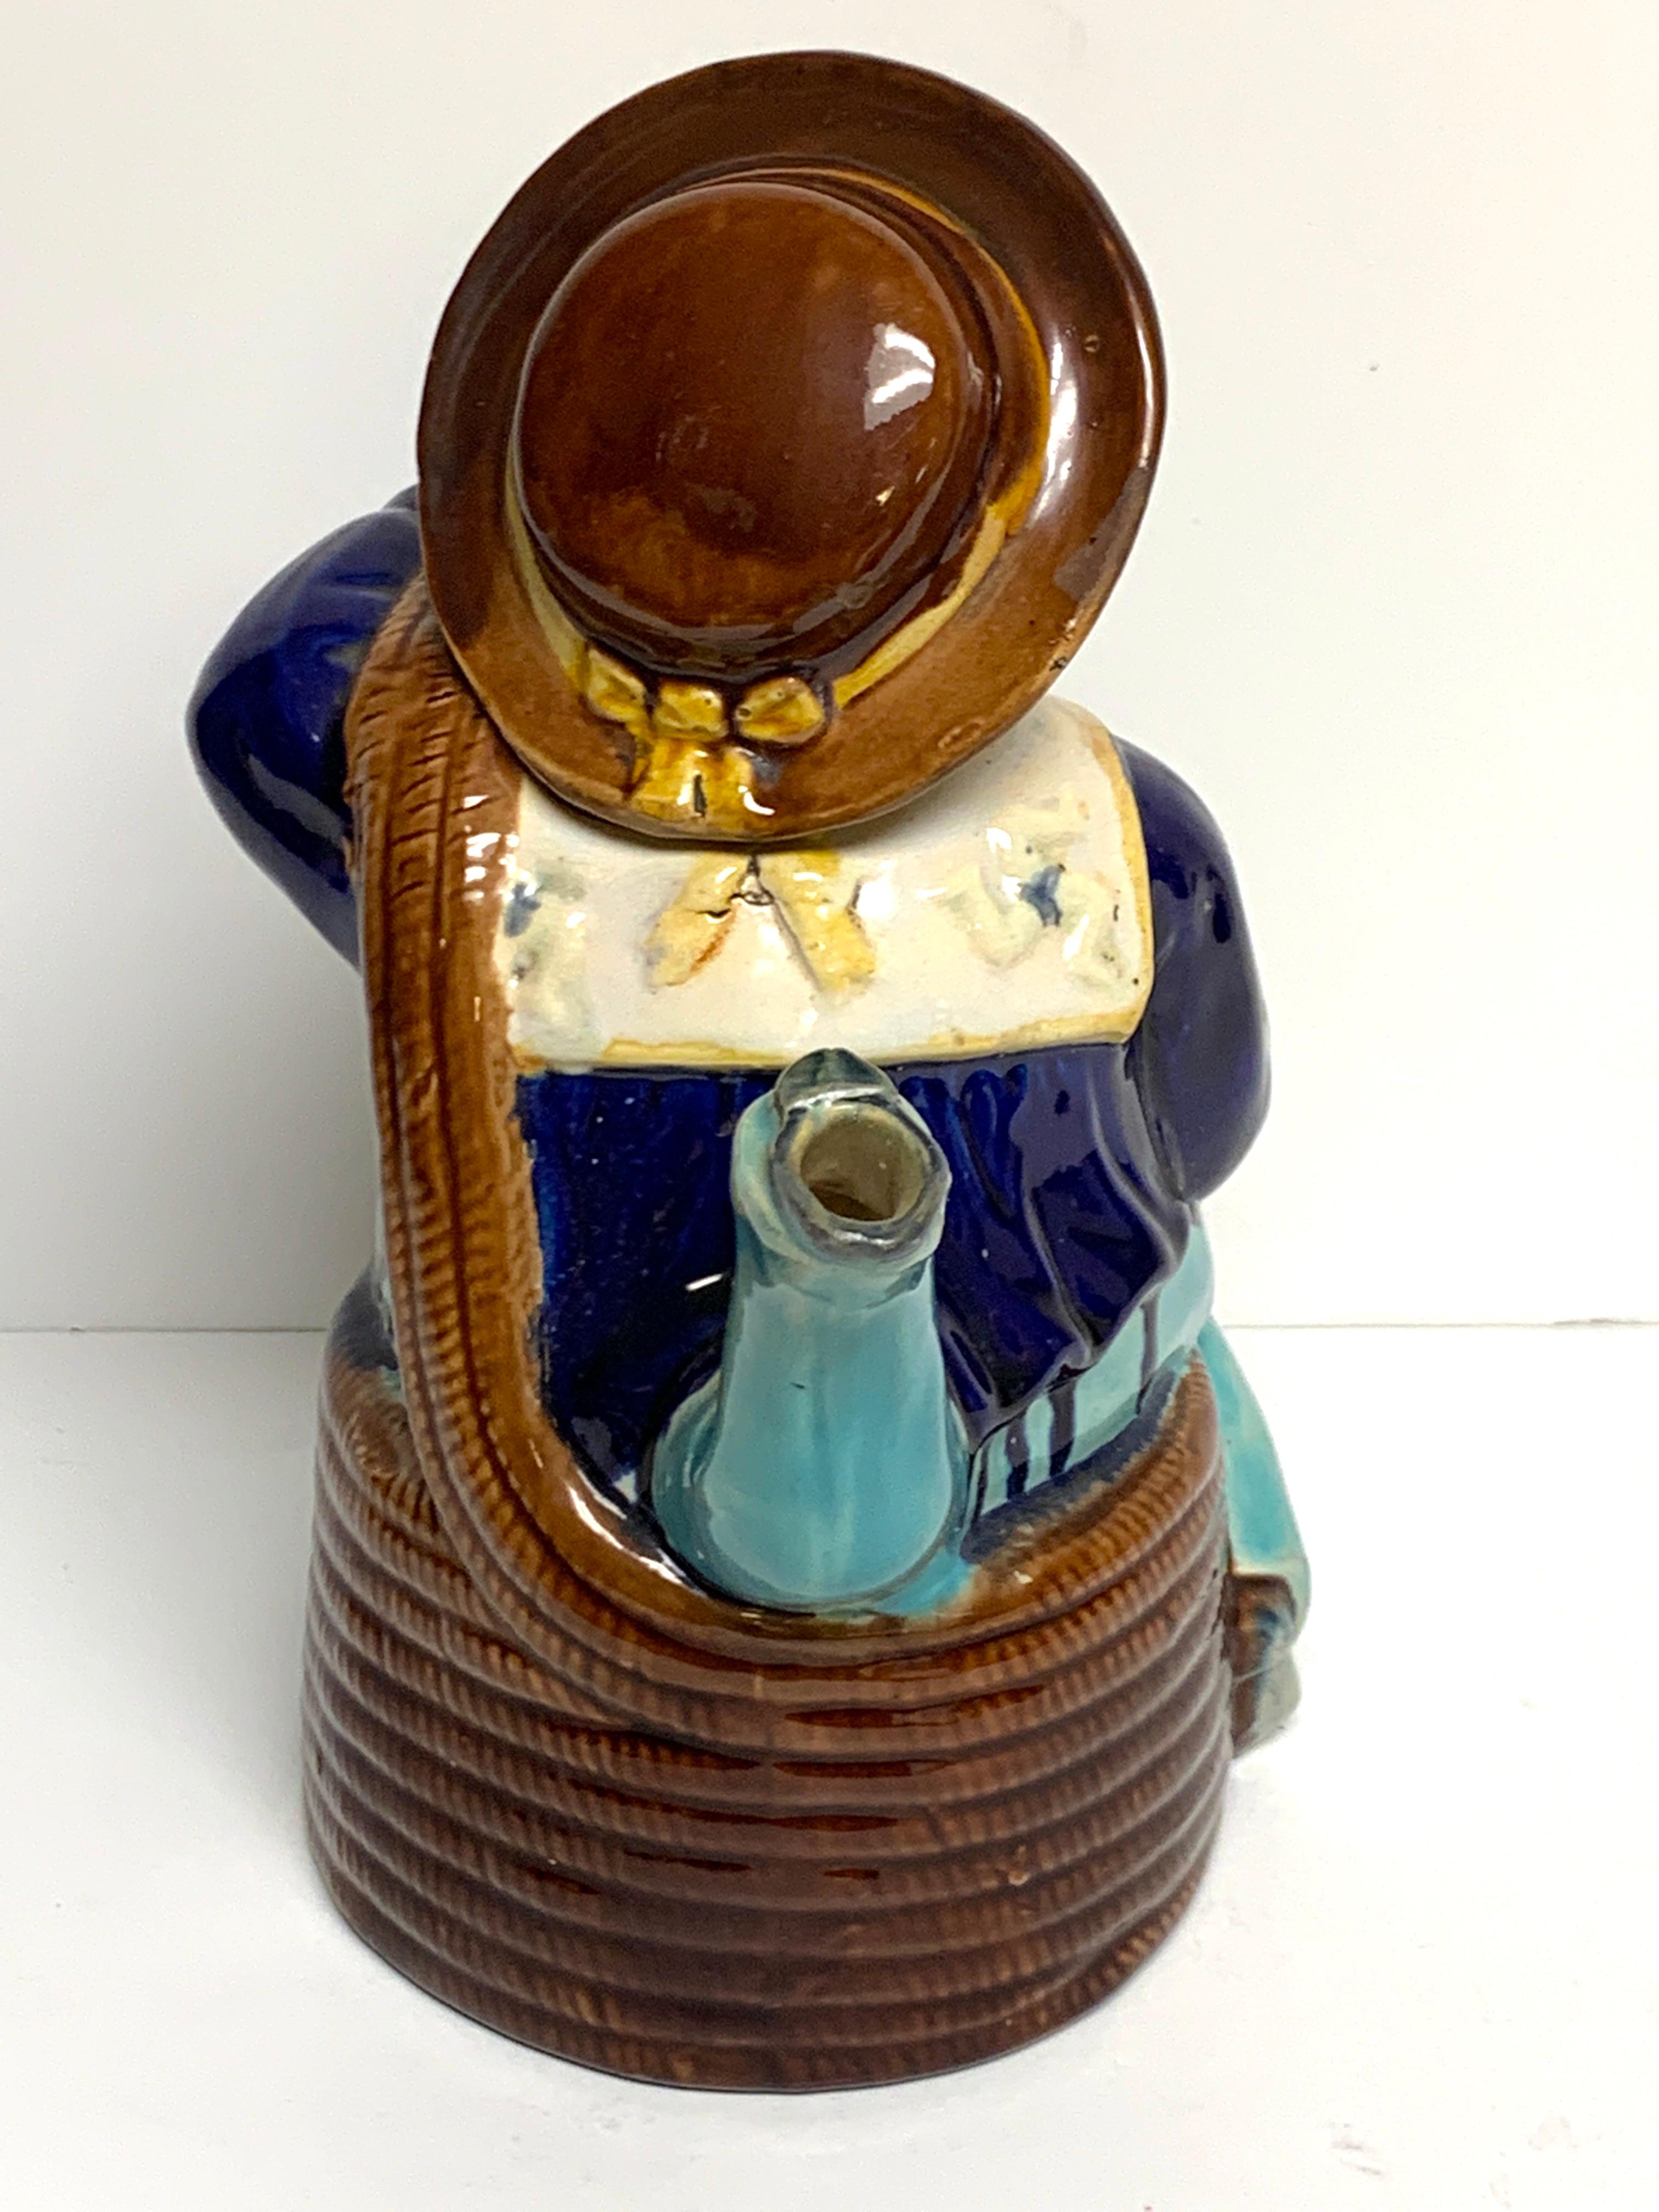 Isle of Man Majolica 'Manx Sailor' Teapot, by William Brownfield & Sons 1